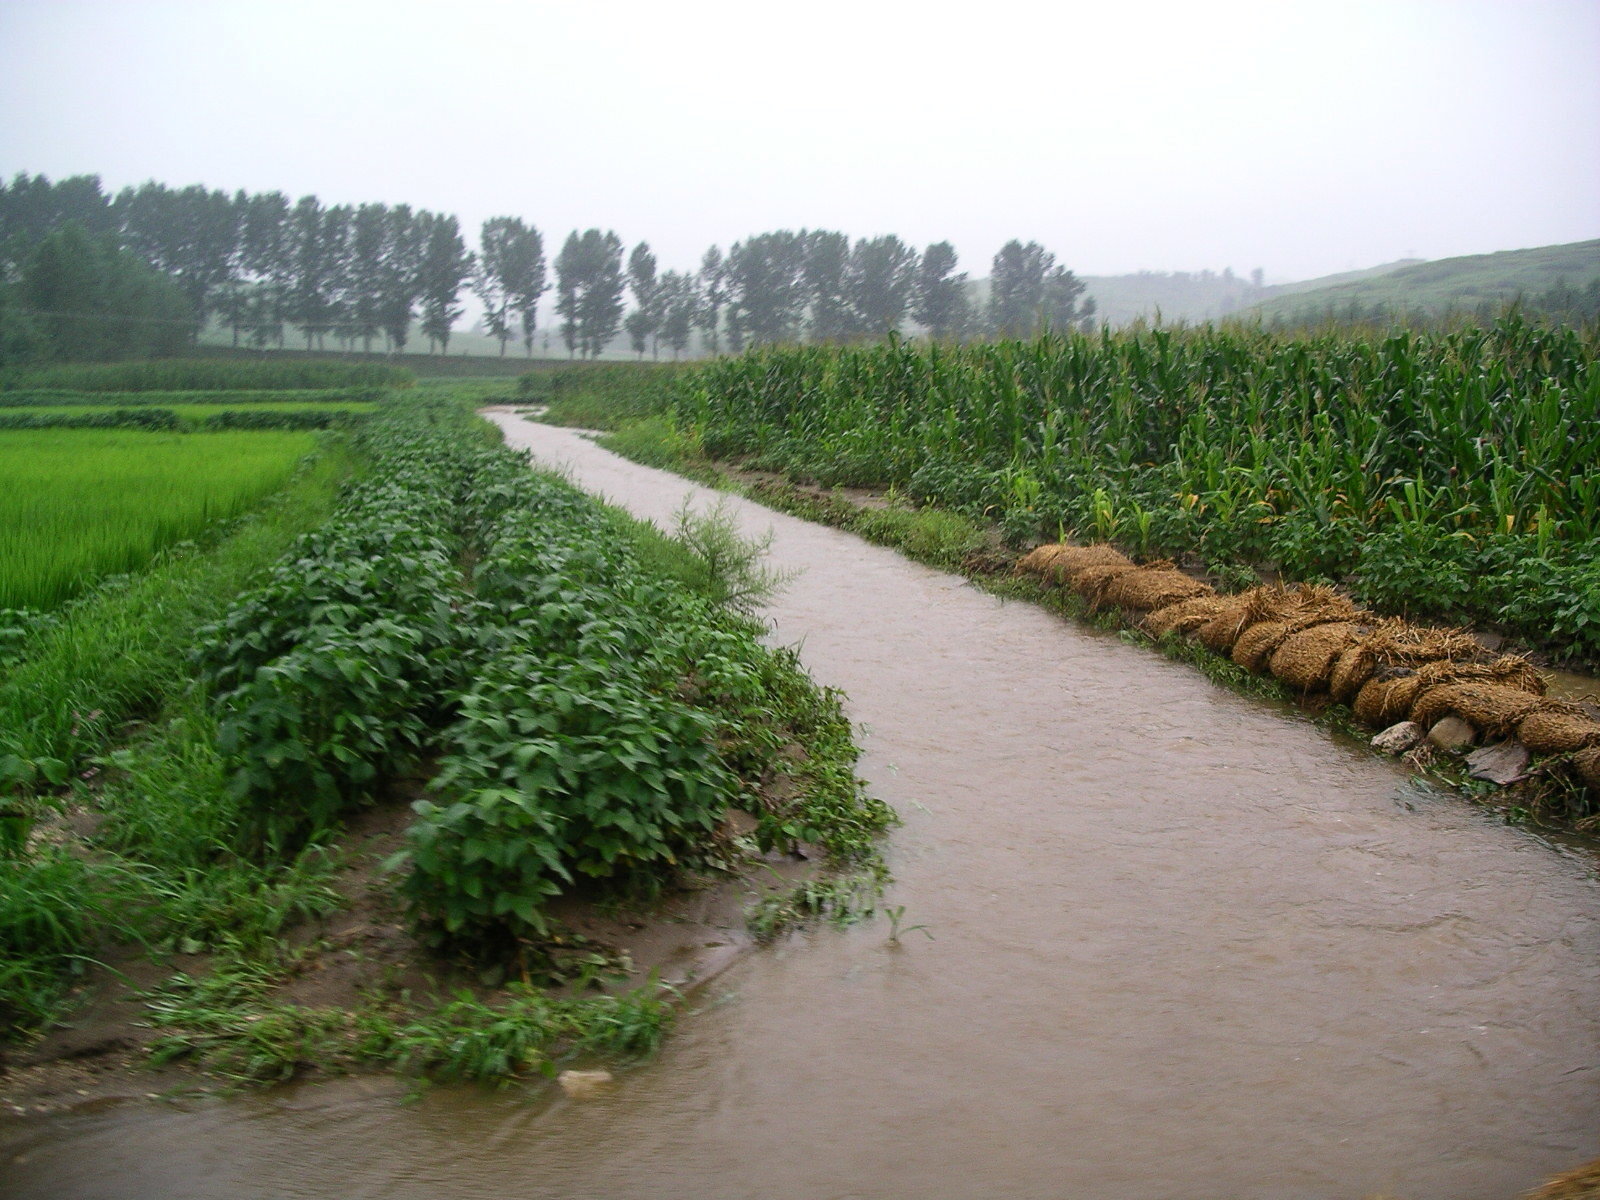 A swelled irrigation canal running through growing crops